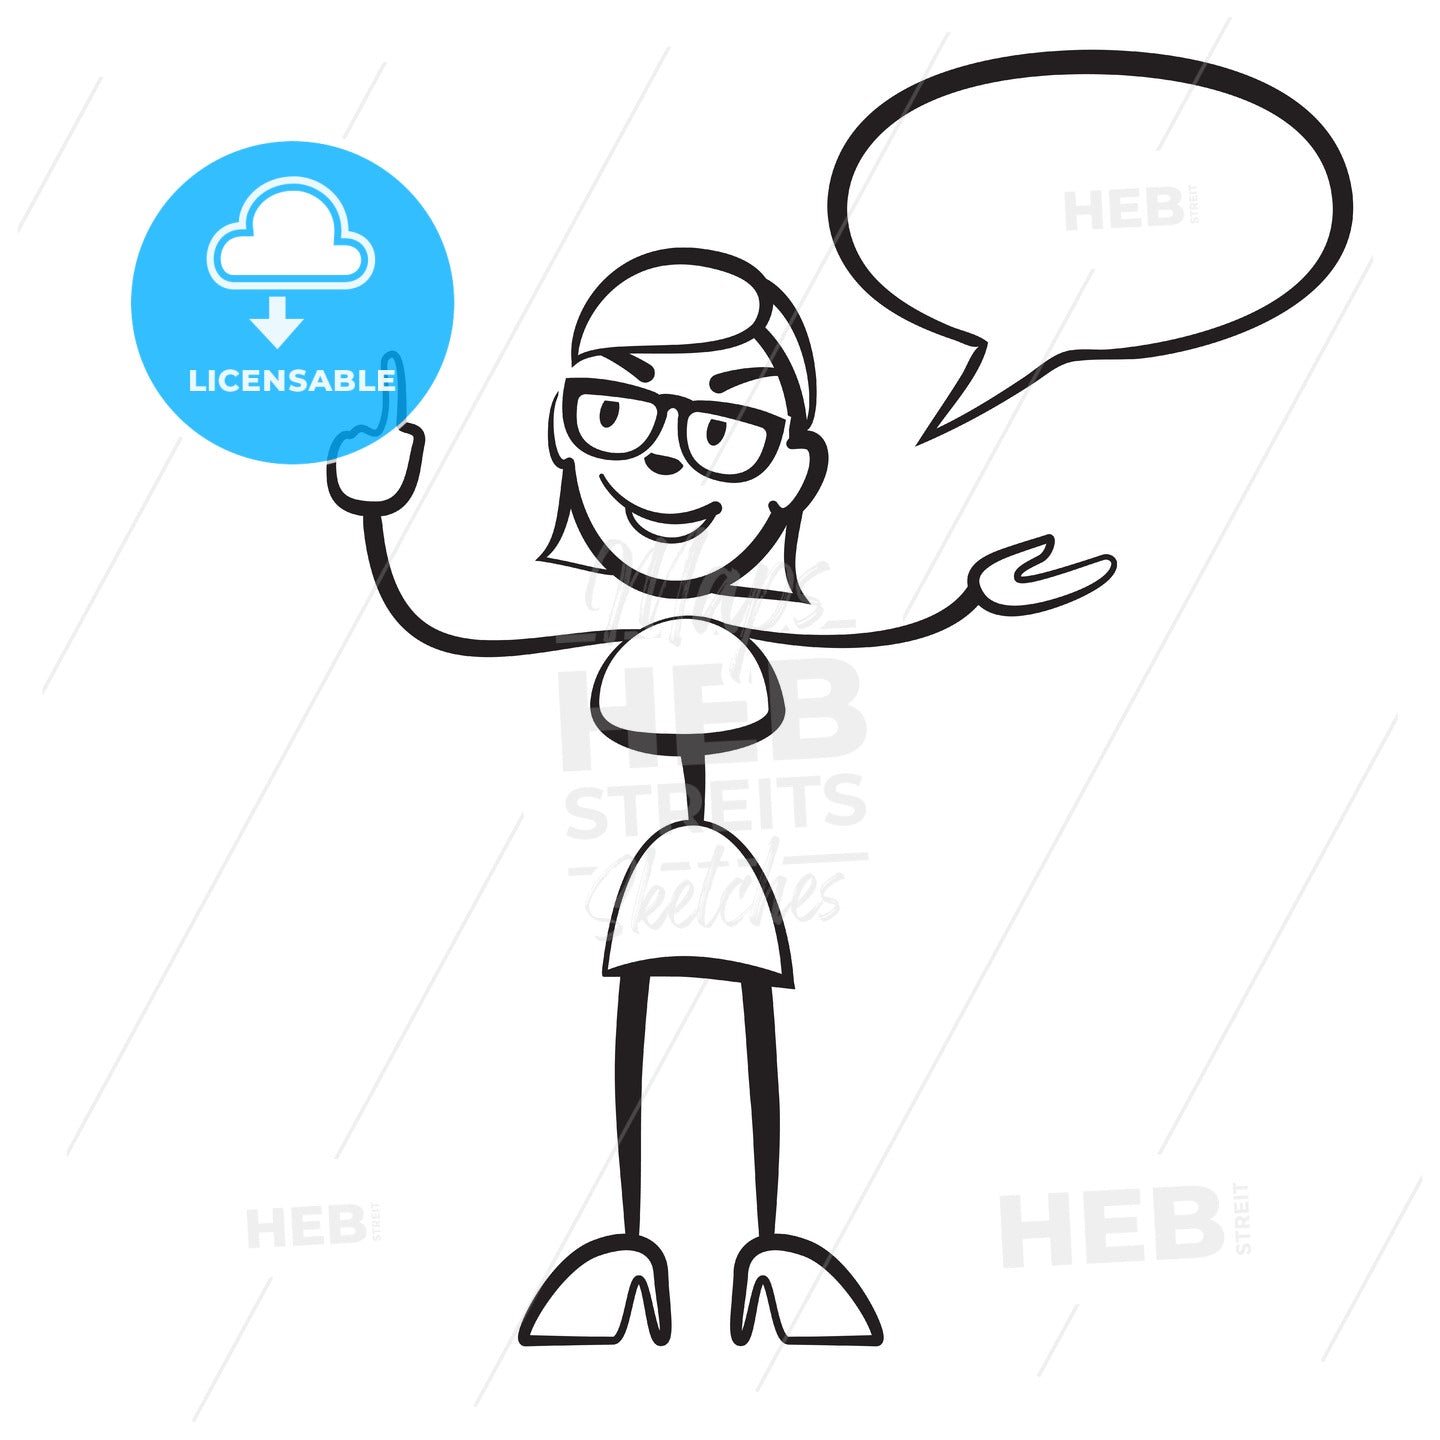 Stick figure woman persona with speech bubble – instant download